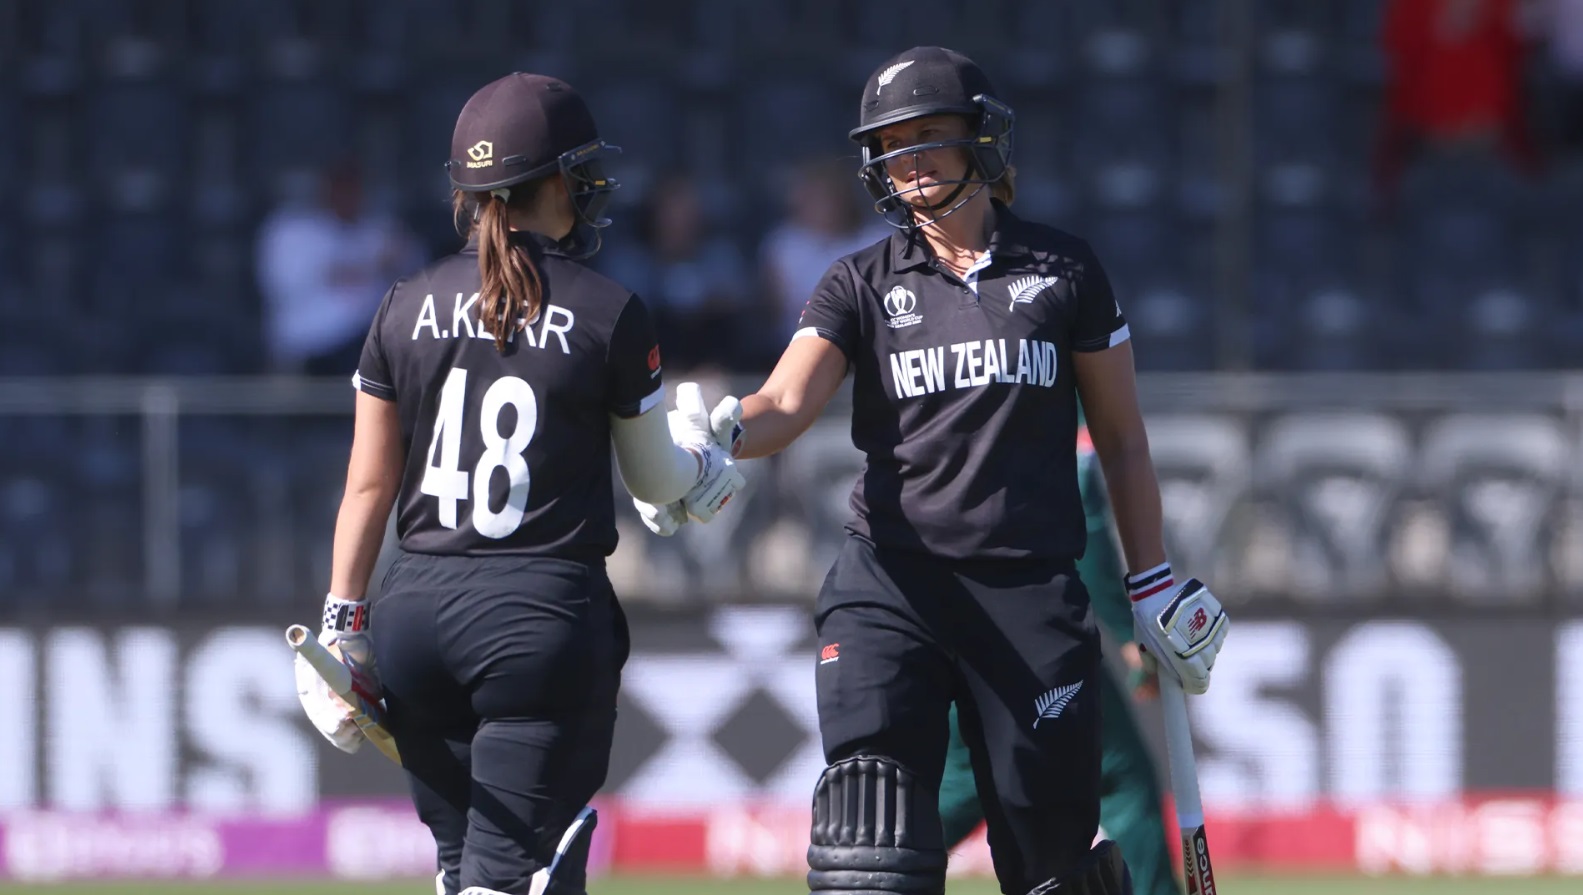 New Zealand women cricketers to receive same pay as men in historic NZC contract